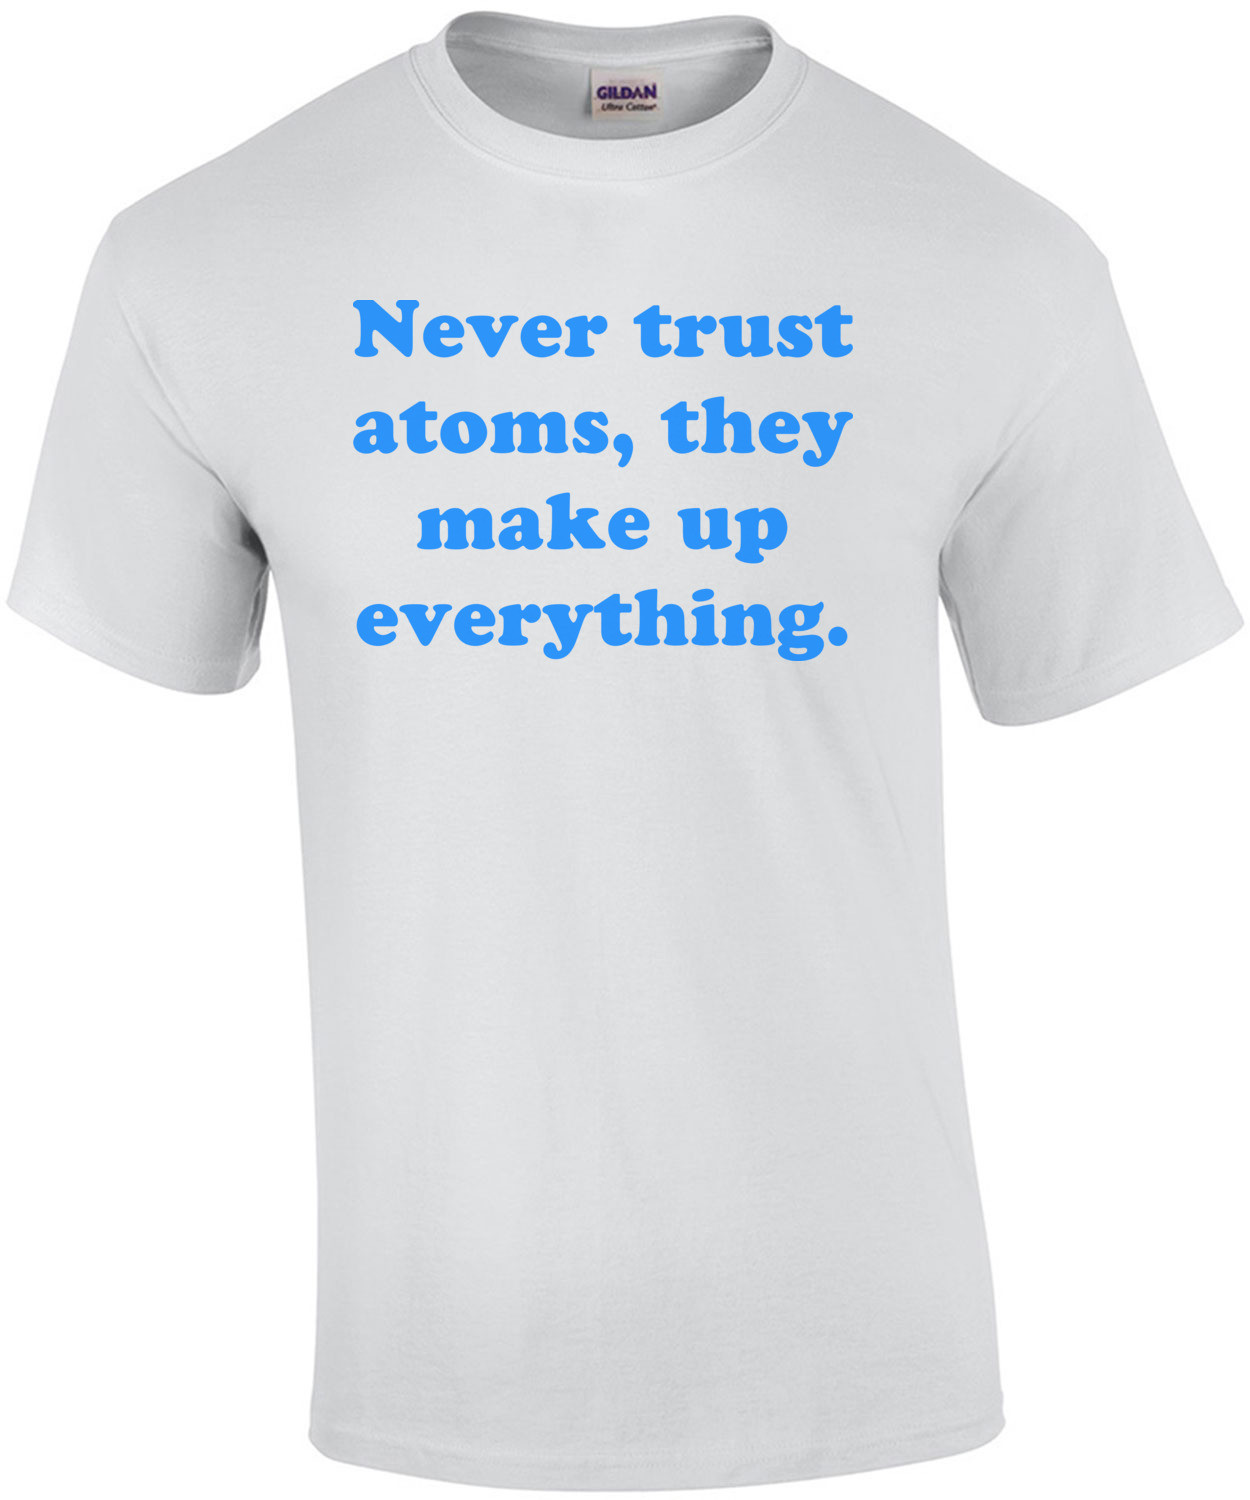 Never trust atoms, they make up everything.